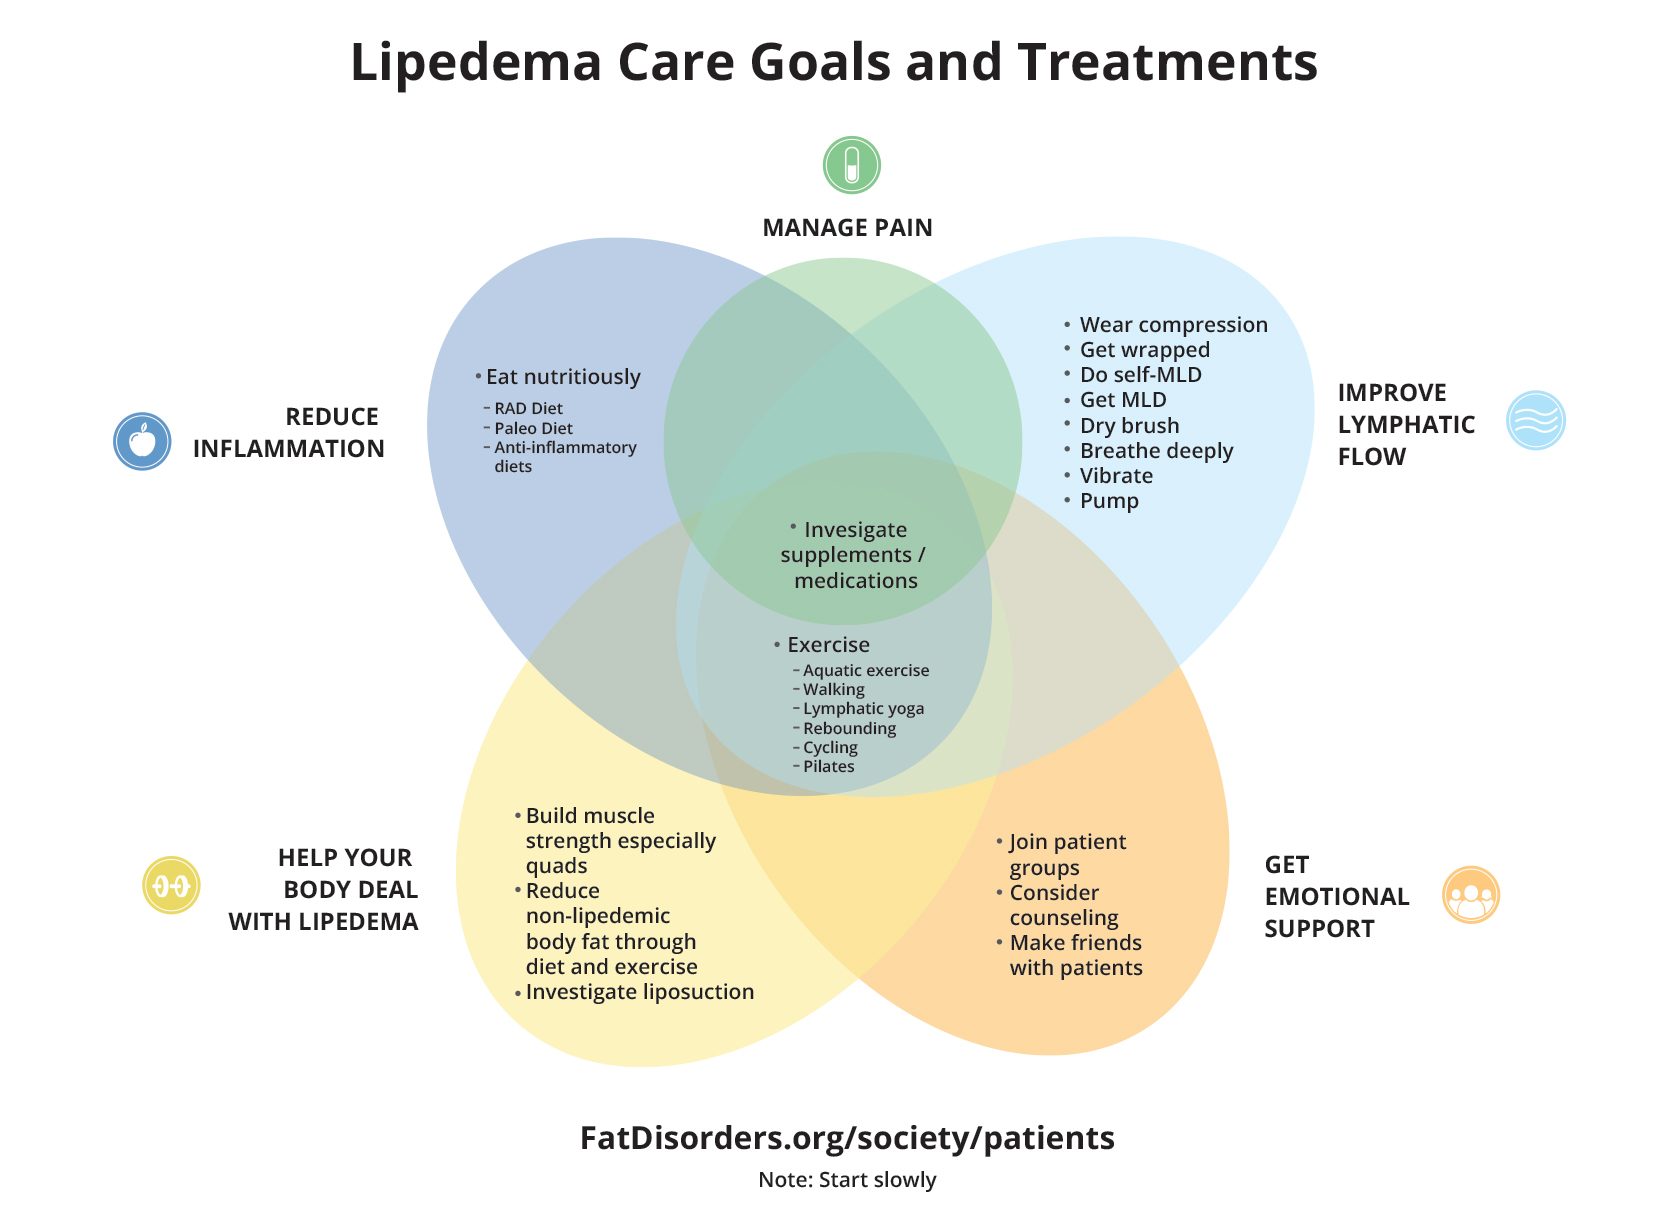 TalkLipoedema on X: Make sure that you find the best conservative  treatments that help you. Remember we all suffer with this chronic disease  but it presents itself differently in each person, “we